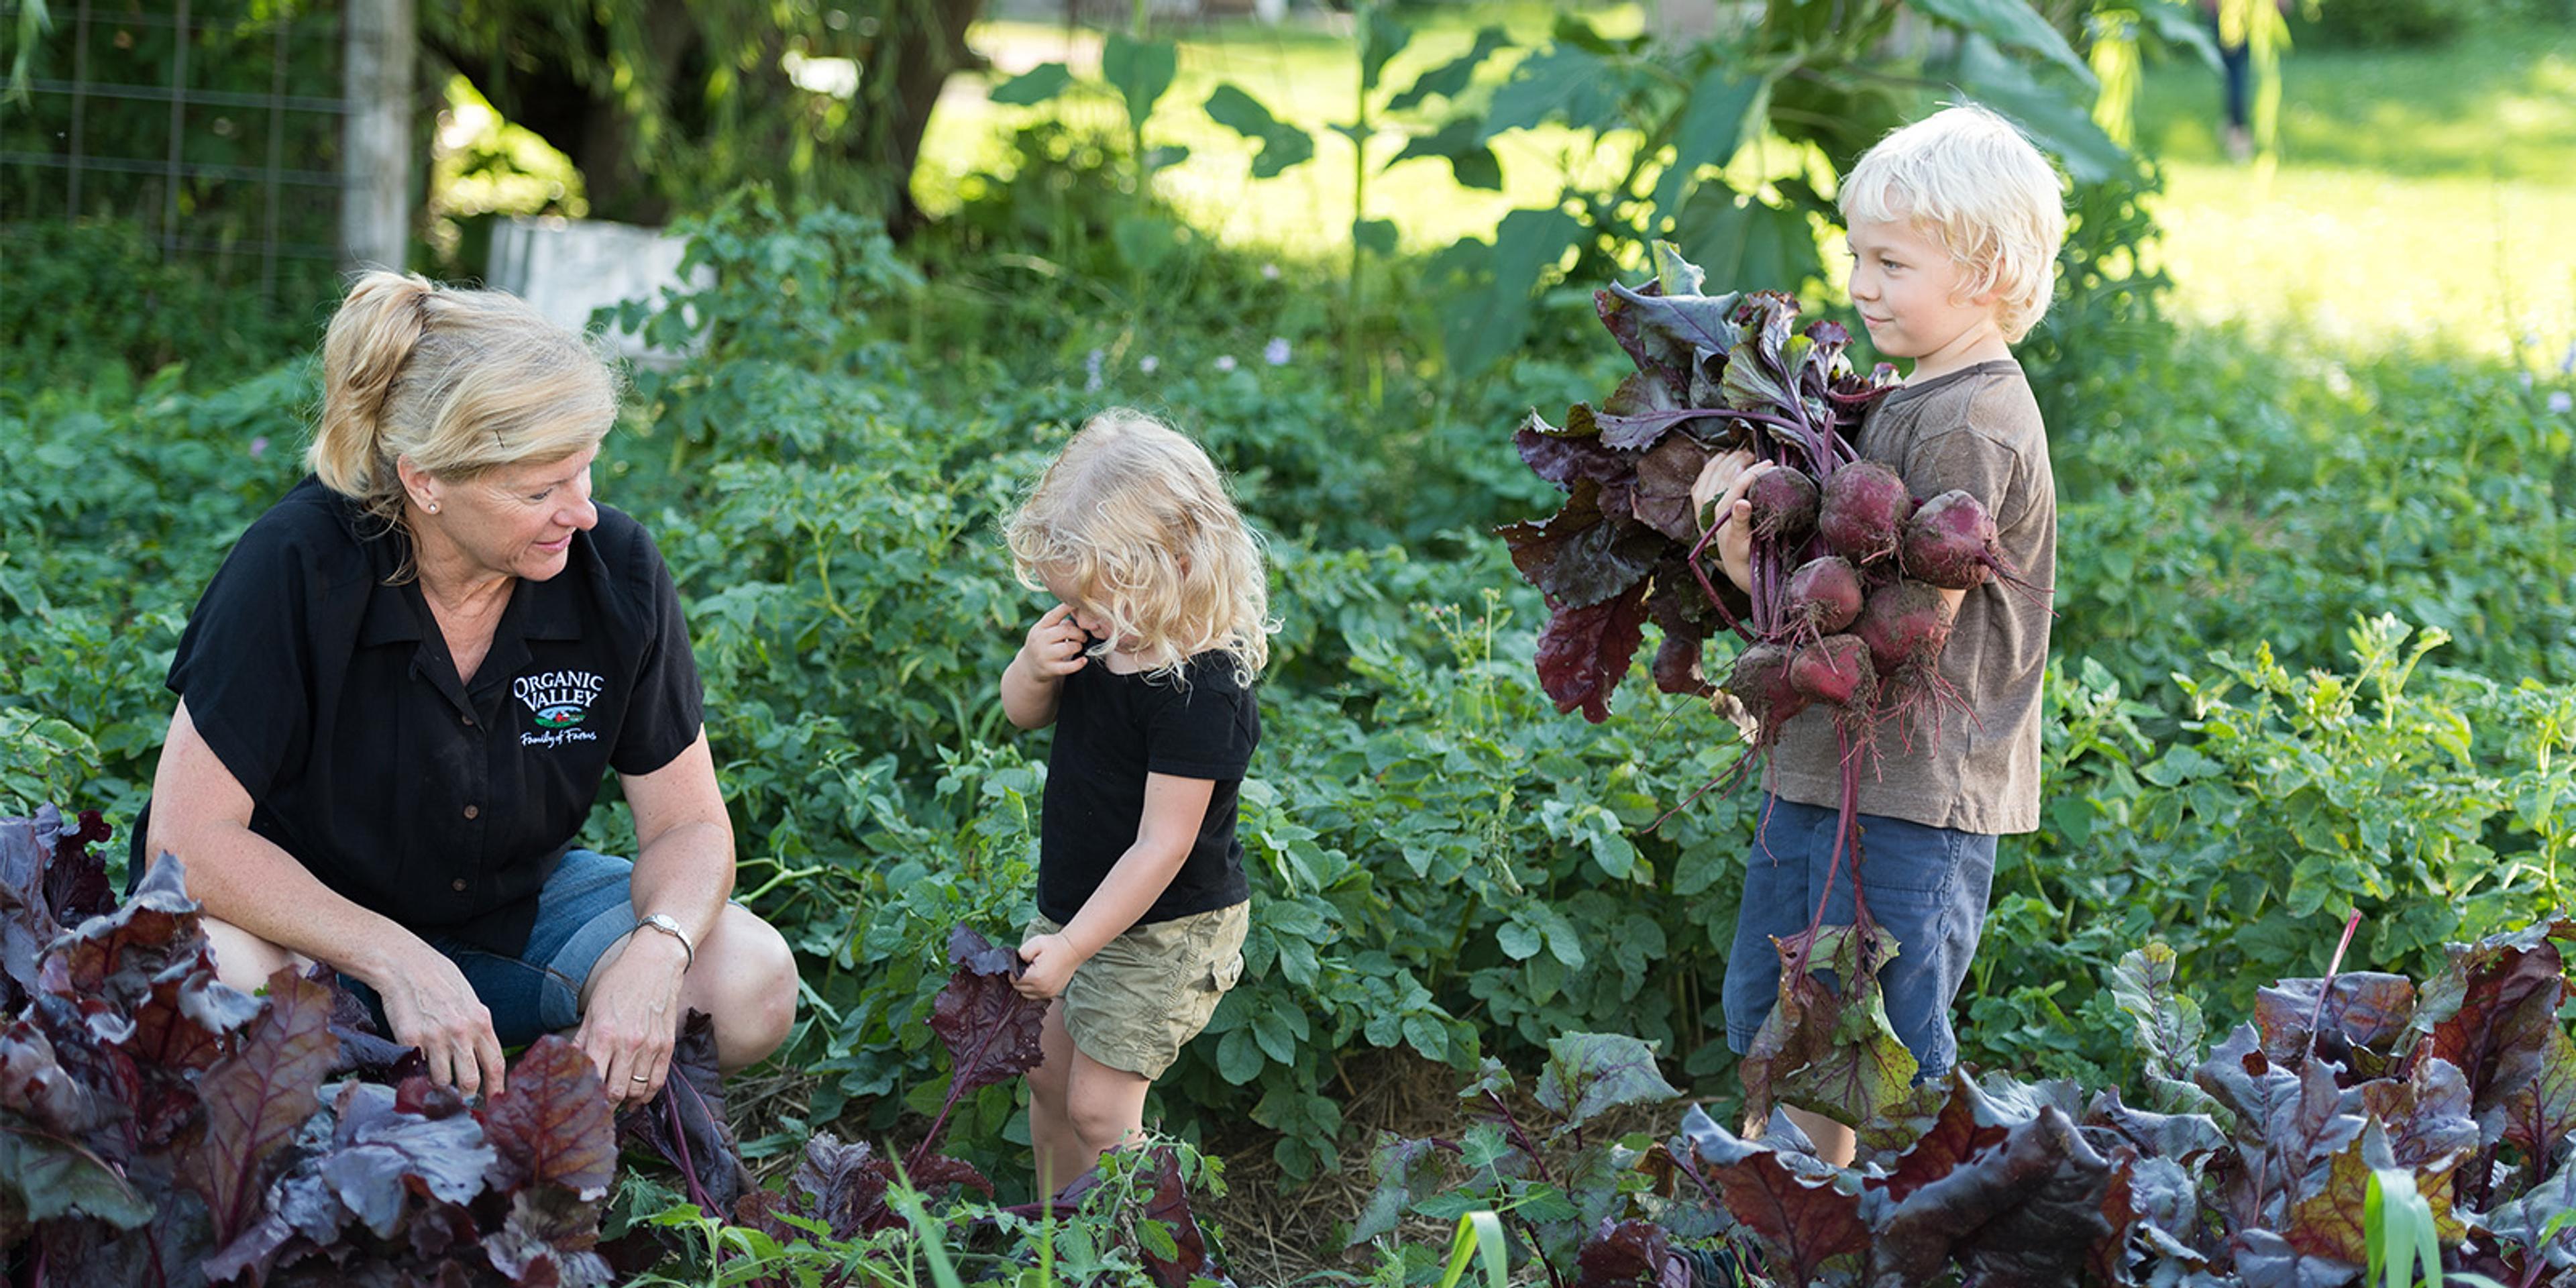 A boy, girl and woman pick beets from a garden at the Placke family farm in Wisconsin.